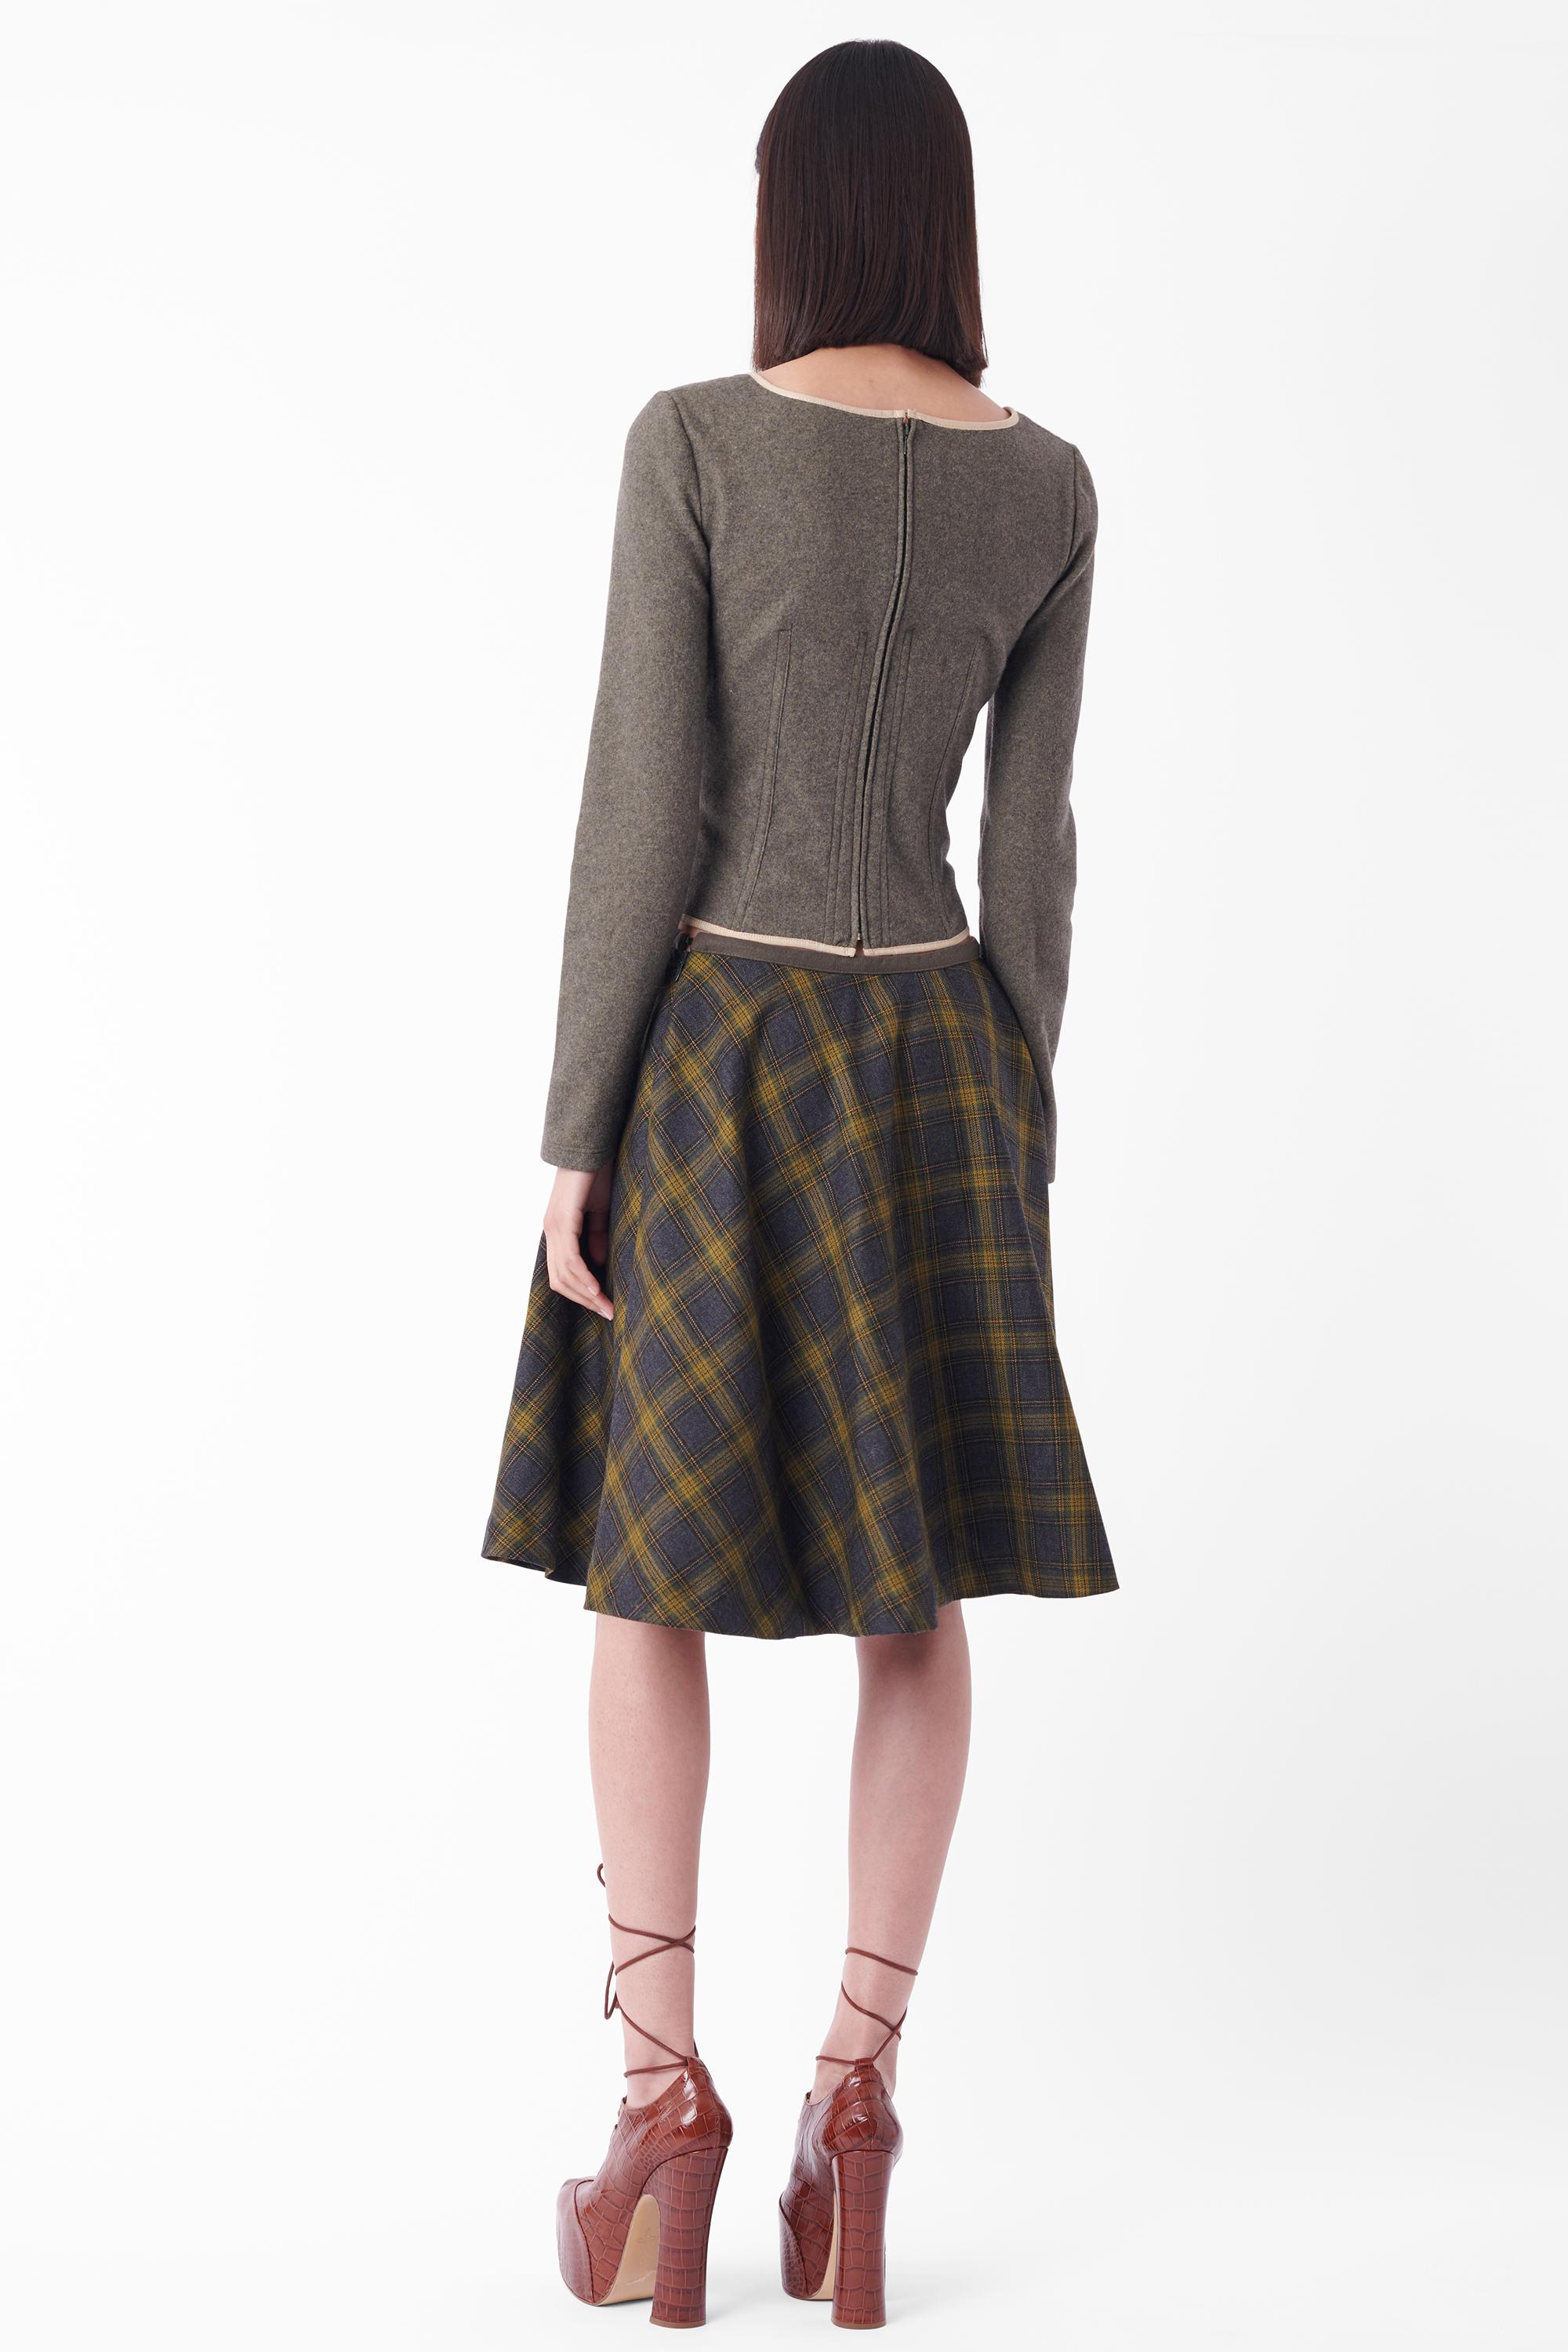 We are excited to present this Vintage D&G long sleeve corset and tartan skirt set. Corset features brushed grey fabric, corset cups, lace front detailing with silver hardware and boning with zip back. Skirt features a grey waistband,  green plaid